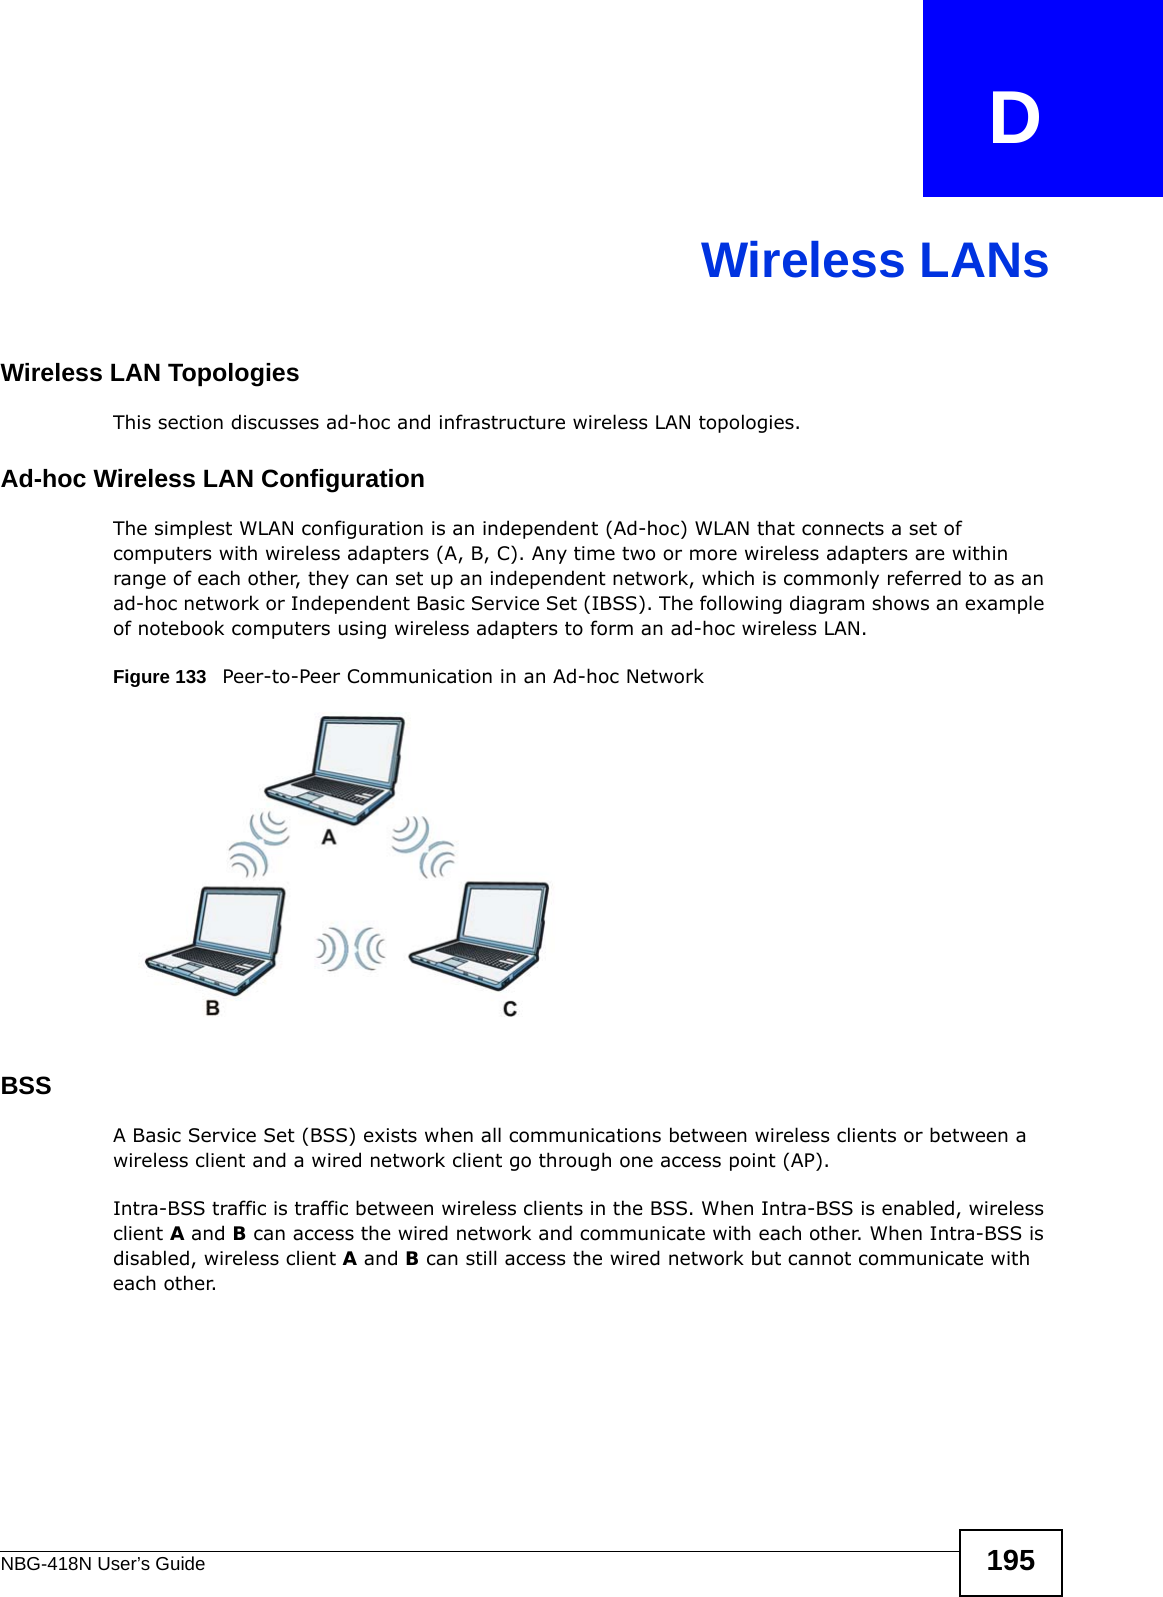 NBG-418N User’s Guide 195APPENDIX   DWireless LANsWireless LAN TopologiesThis section discusses ad-hoc and infrastructure wireless LAN topologies.Ad-hoc Wireless LAN ConfigurationThe simplest WLAN configuration is an independent (Ad-hoc) WLAN that connects a set of computers with wireless adapters (A, B, C). Any time two or more wireless adapters are within range of each other, they can set up an independent network, which is commonly referred to as an ad-hoc network or Independent Basic Service Set (IBSS). The following diagram shows an example of notebook computers using wireless adapters to form an ad-hoc wireless LAN. Figure 133   Peer-to-Peer Communication in an Ad-hoc NetworkBSSA Basic Service Set (BSS) exists when all communications between wireless clients or between a wireless client and a wired network client go through one access point (AP). Intra-BSS traffic is traffic between wireless clients in the BSS. When Intra-BSS is enabled, wireless client A and B can access the wired network and communicate with each other. When Intra-BSS is disabled, wireless client A and B can still access the wired network but cannot communicate with each other.